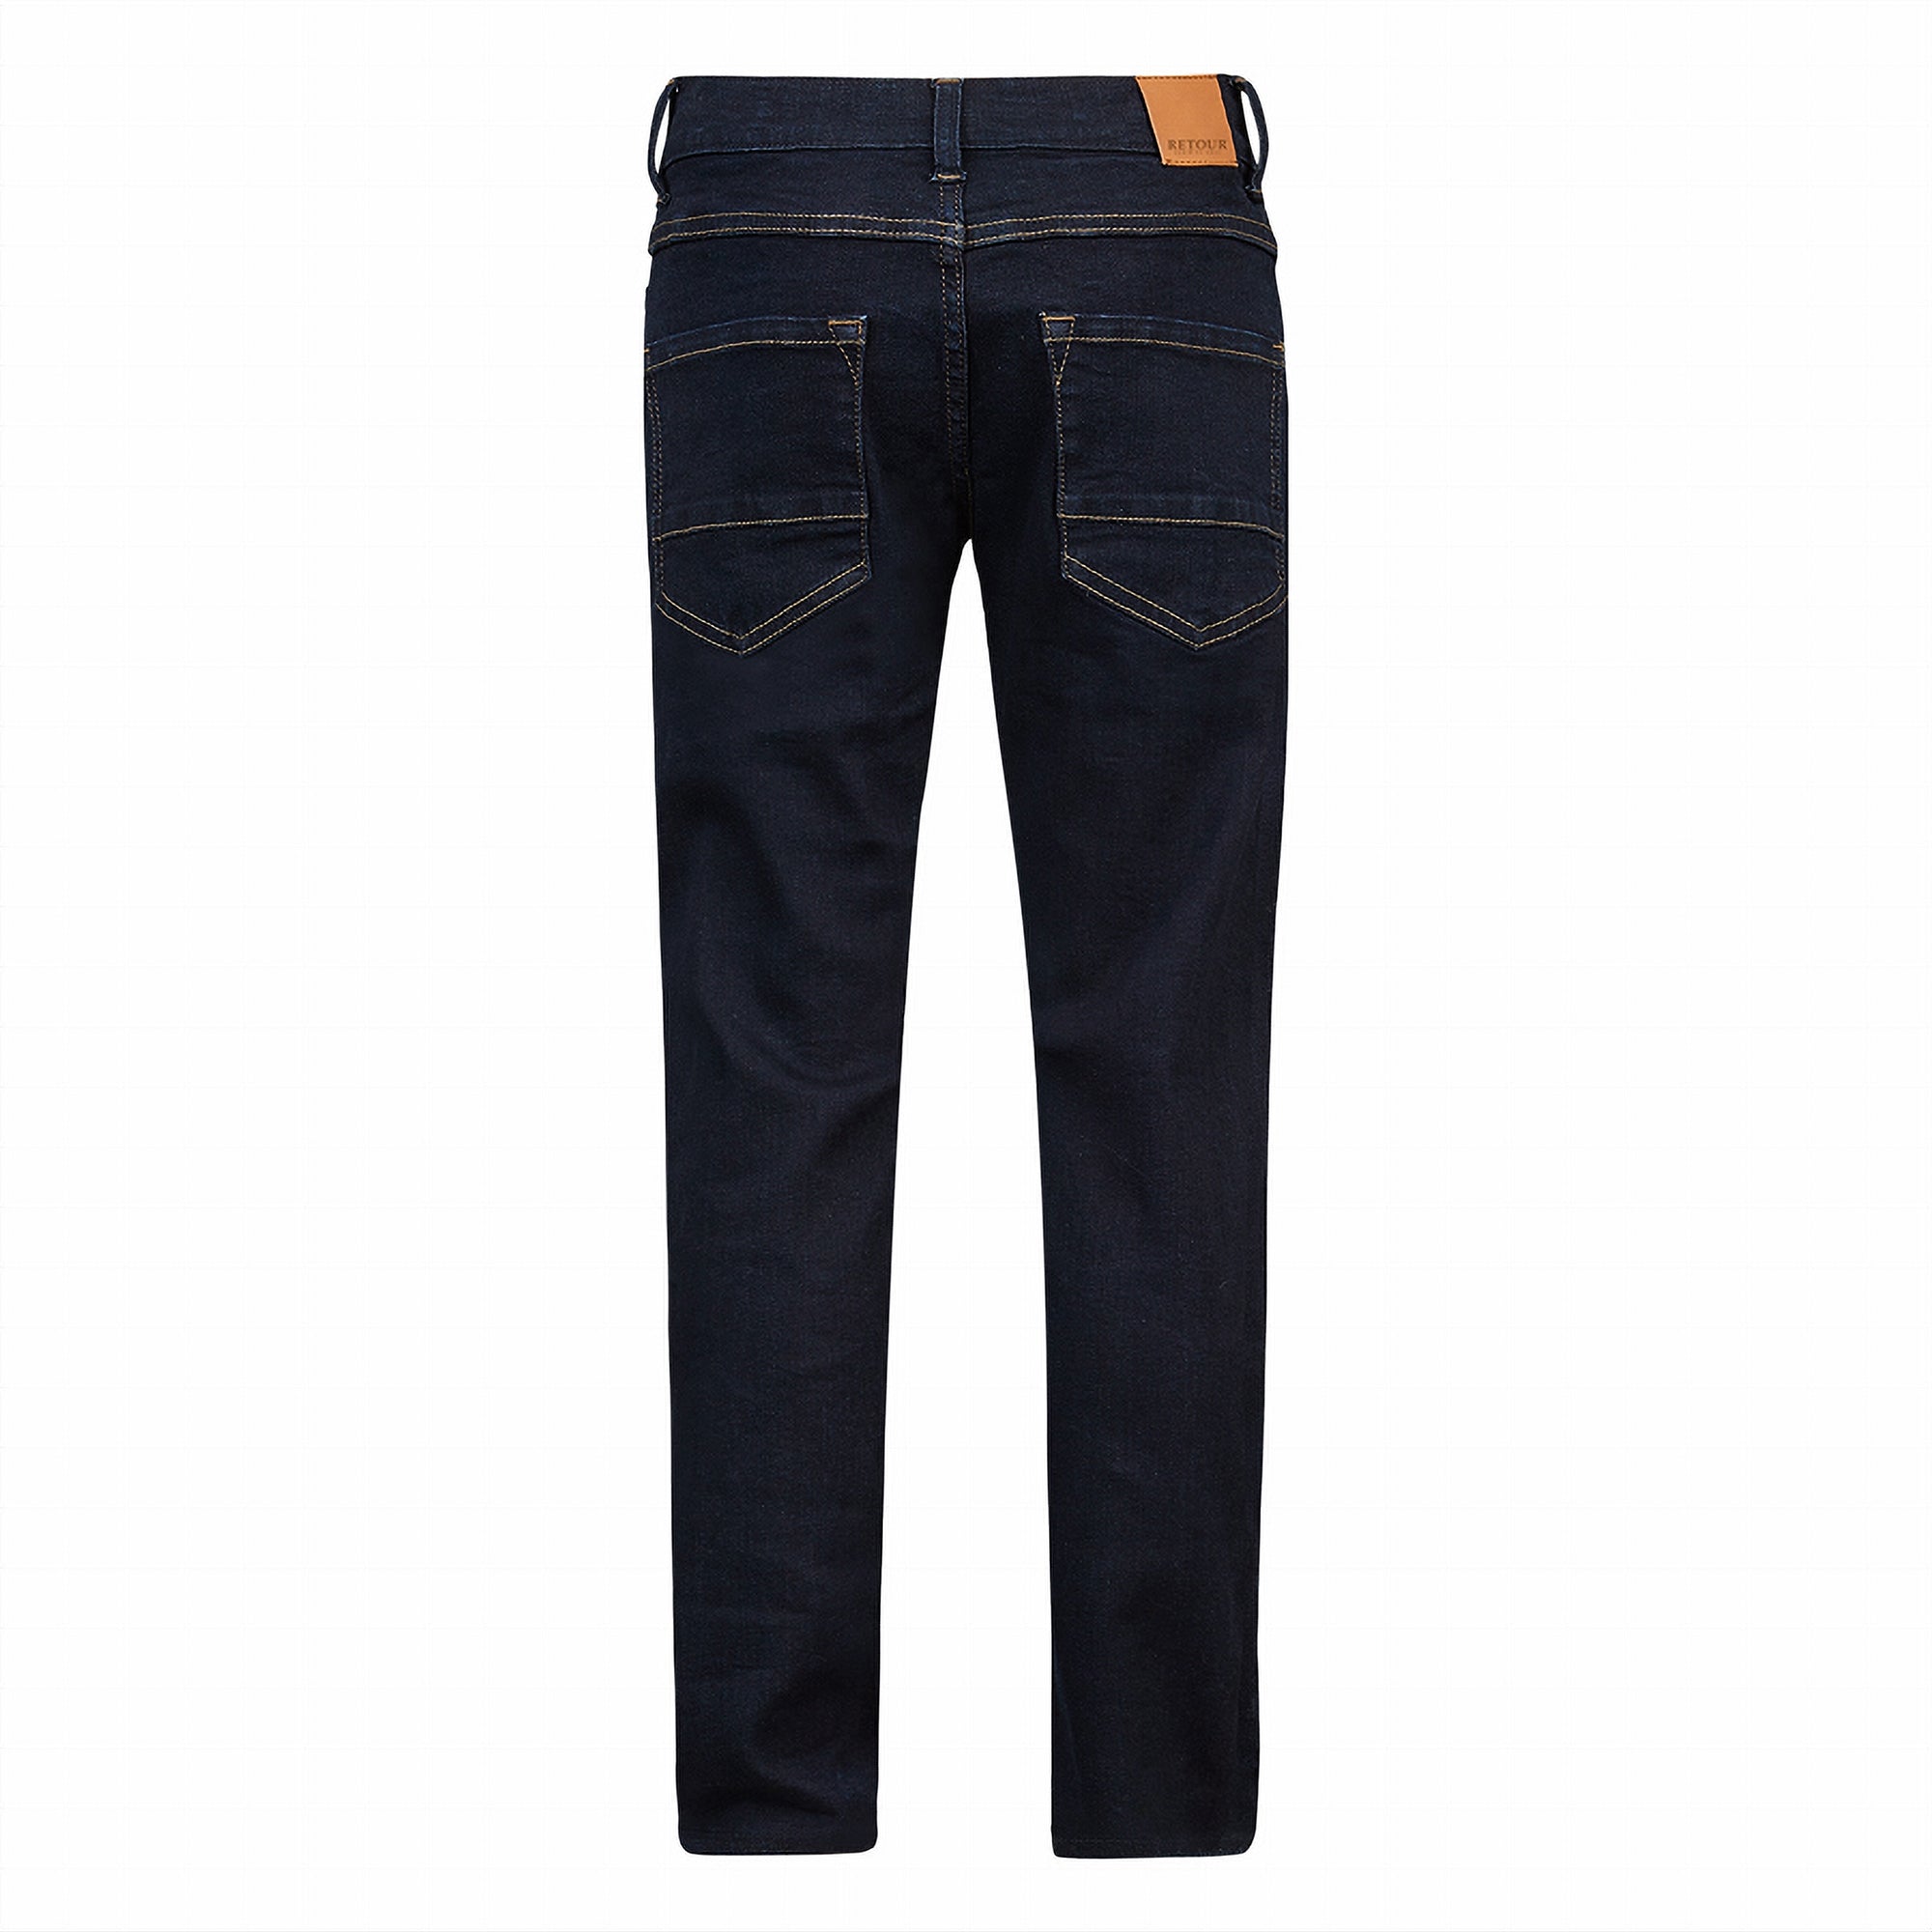 RETOUR Jeans Wulf rinsed blue